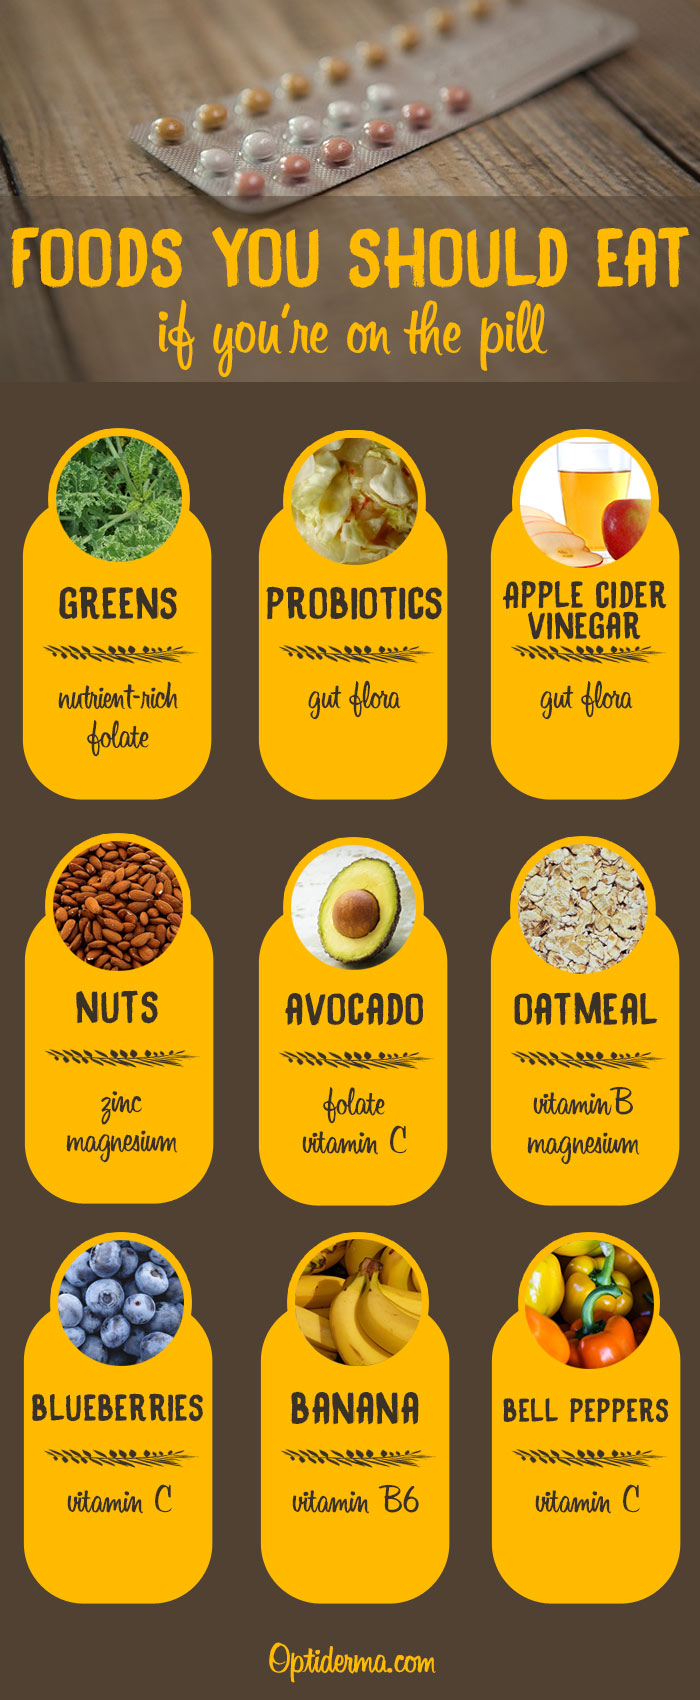 Foods your should eat if you're on the pill